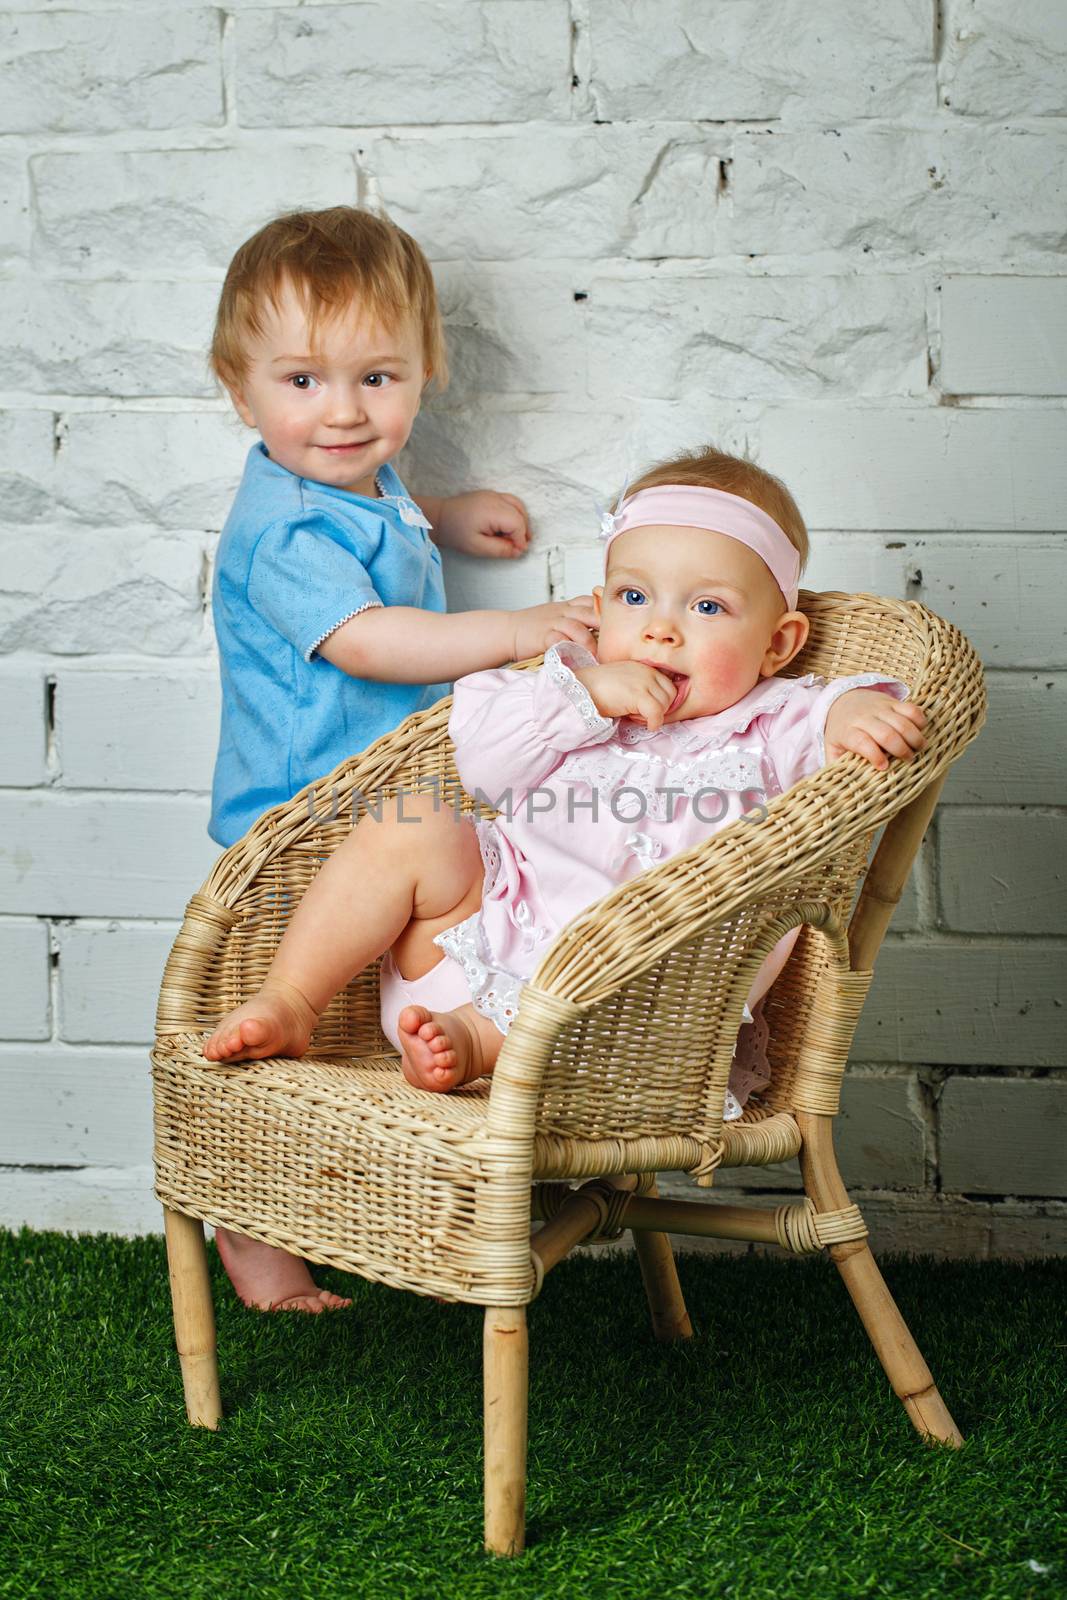 Brother and sister playing in the backyard next to the wicker chair